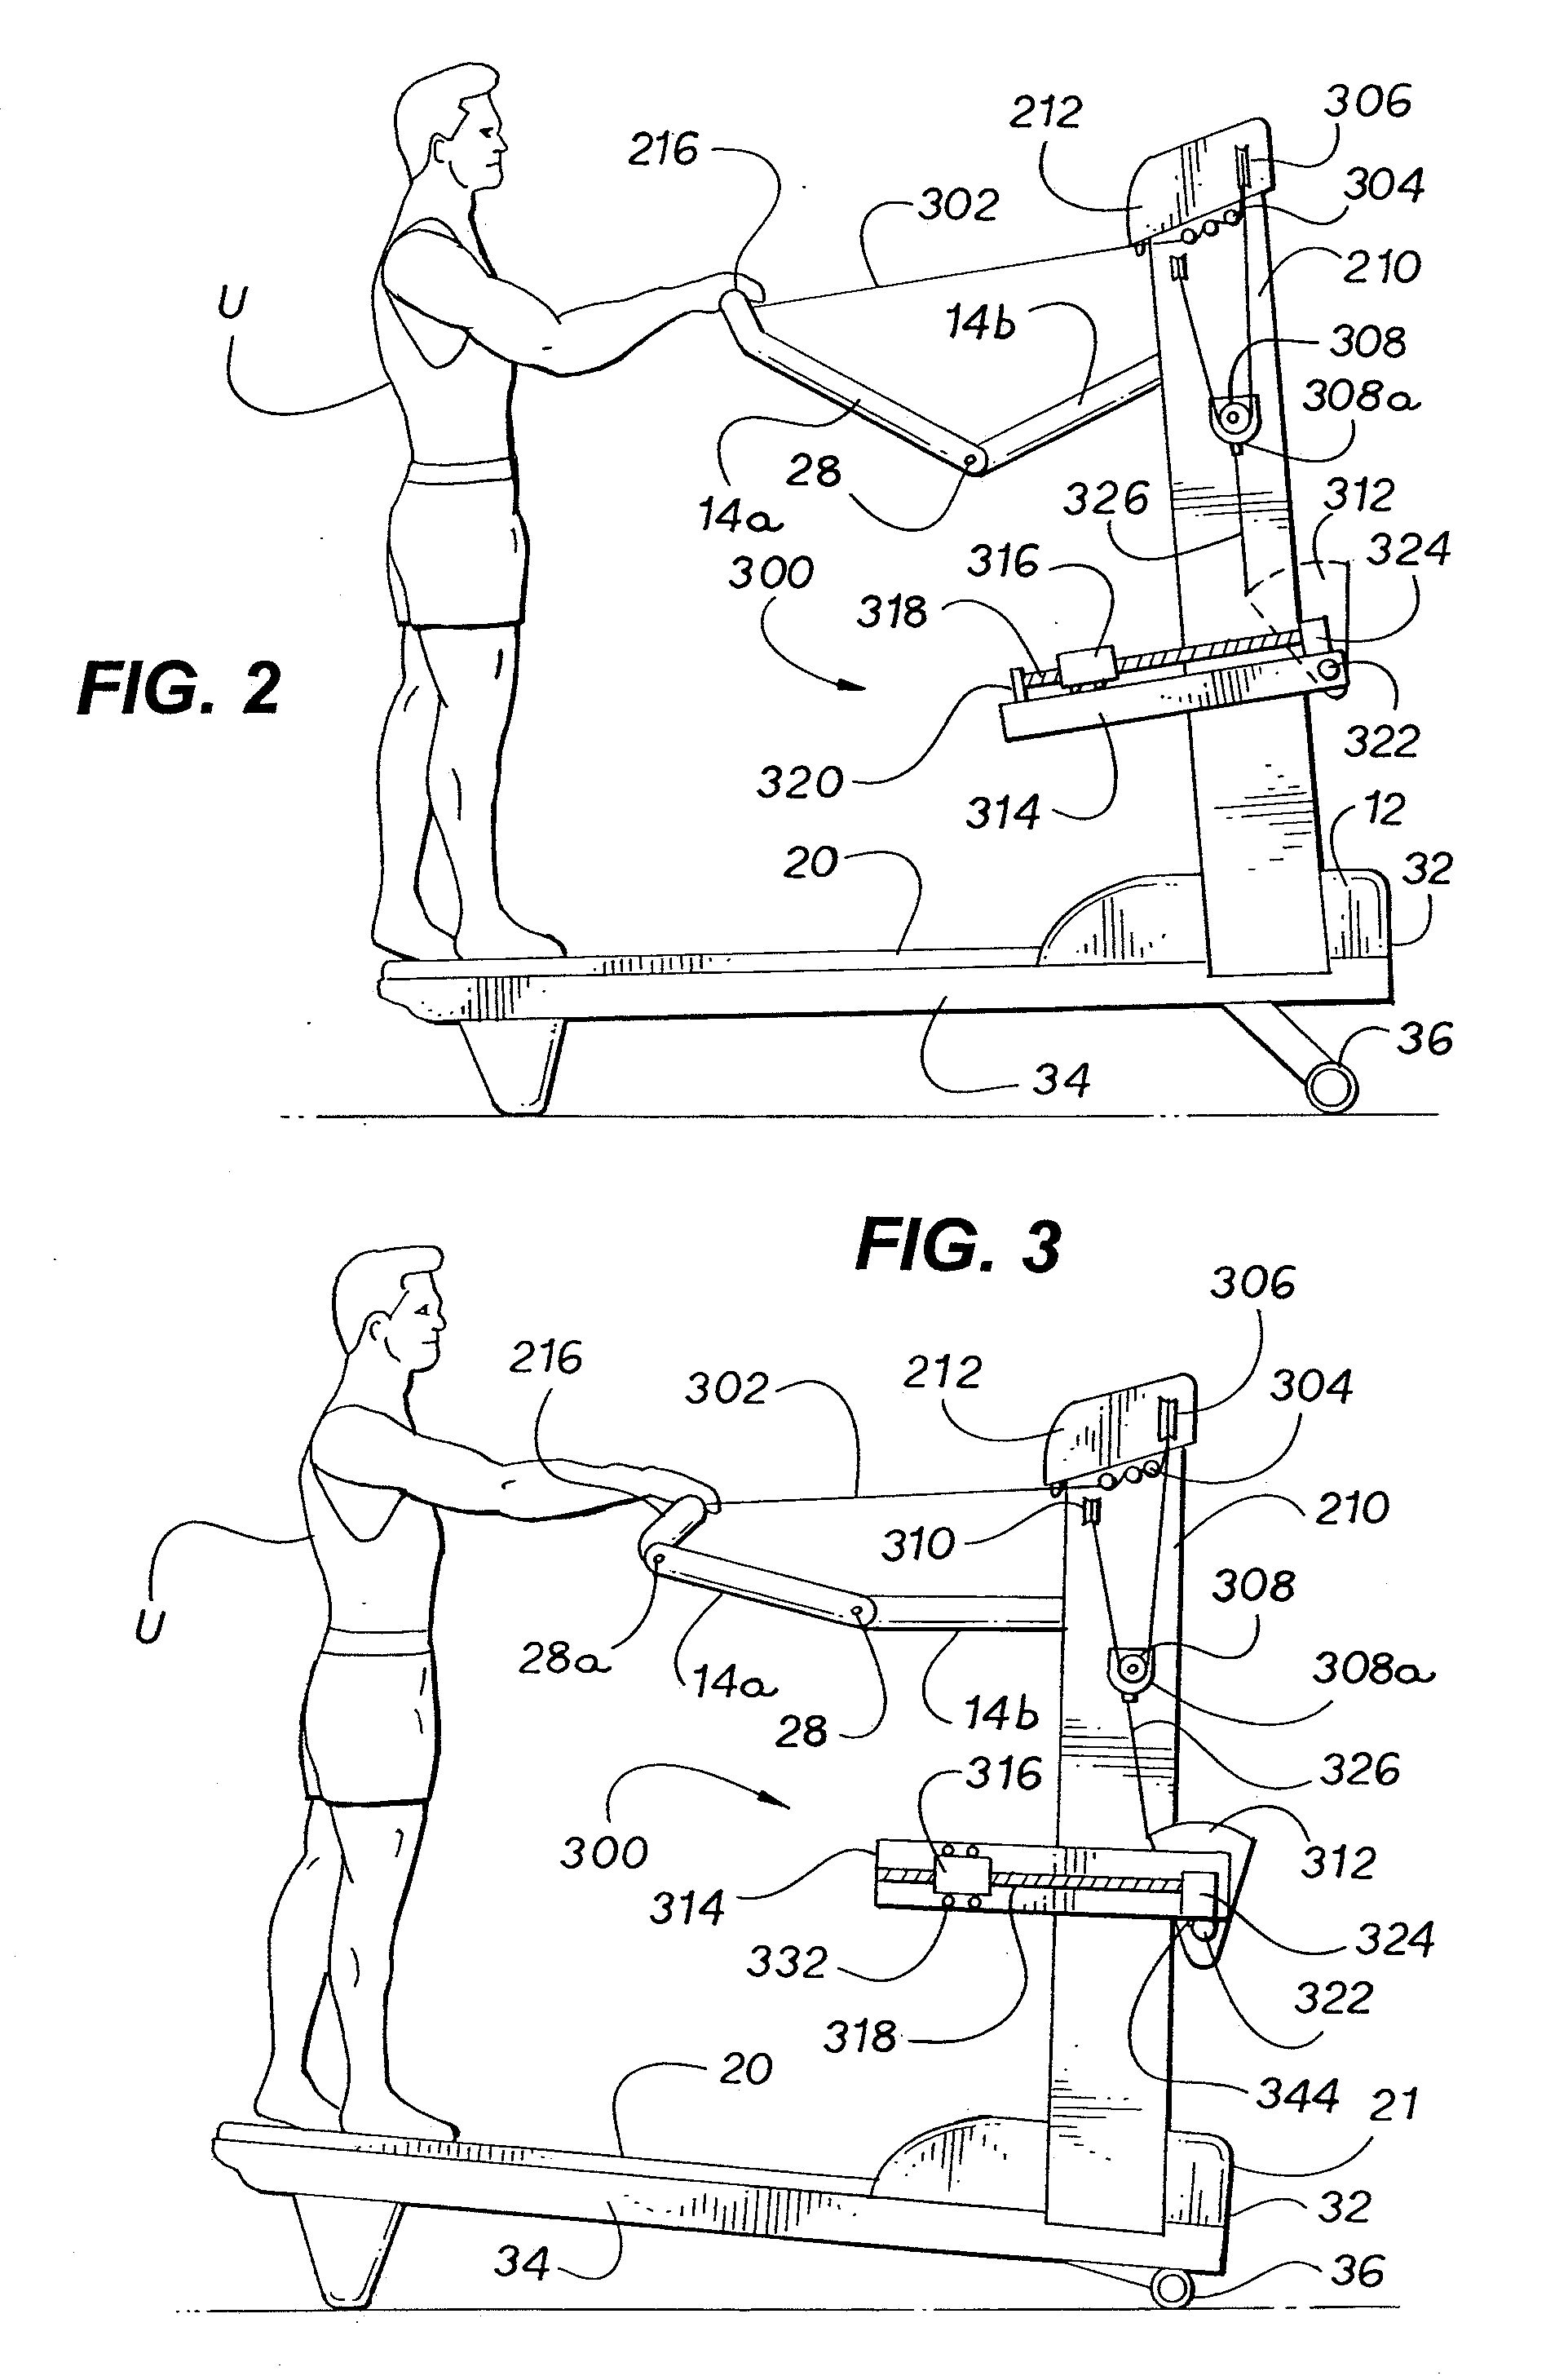 Dual direction exercise treadmill for simulating a dragging or pulling action